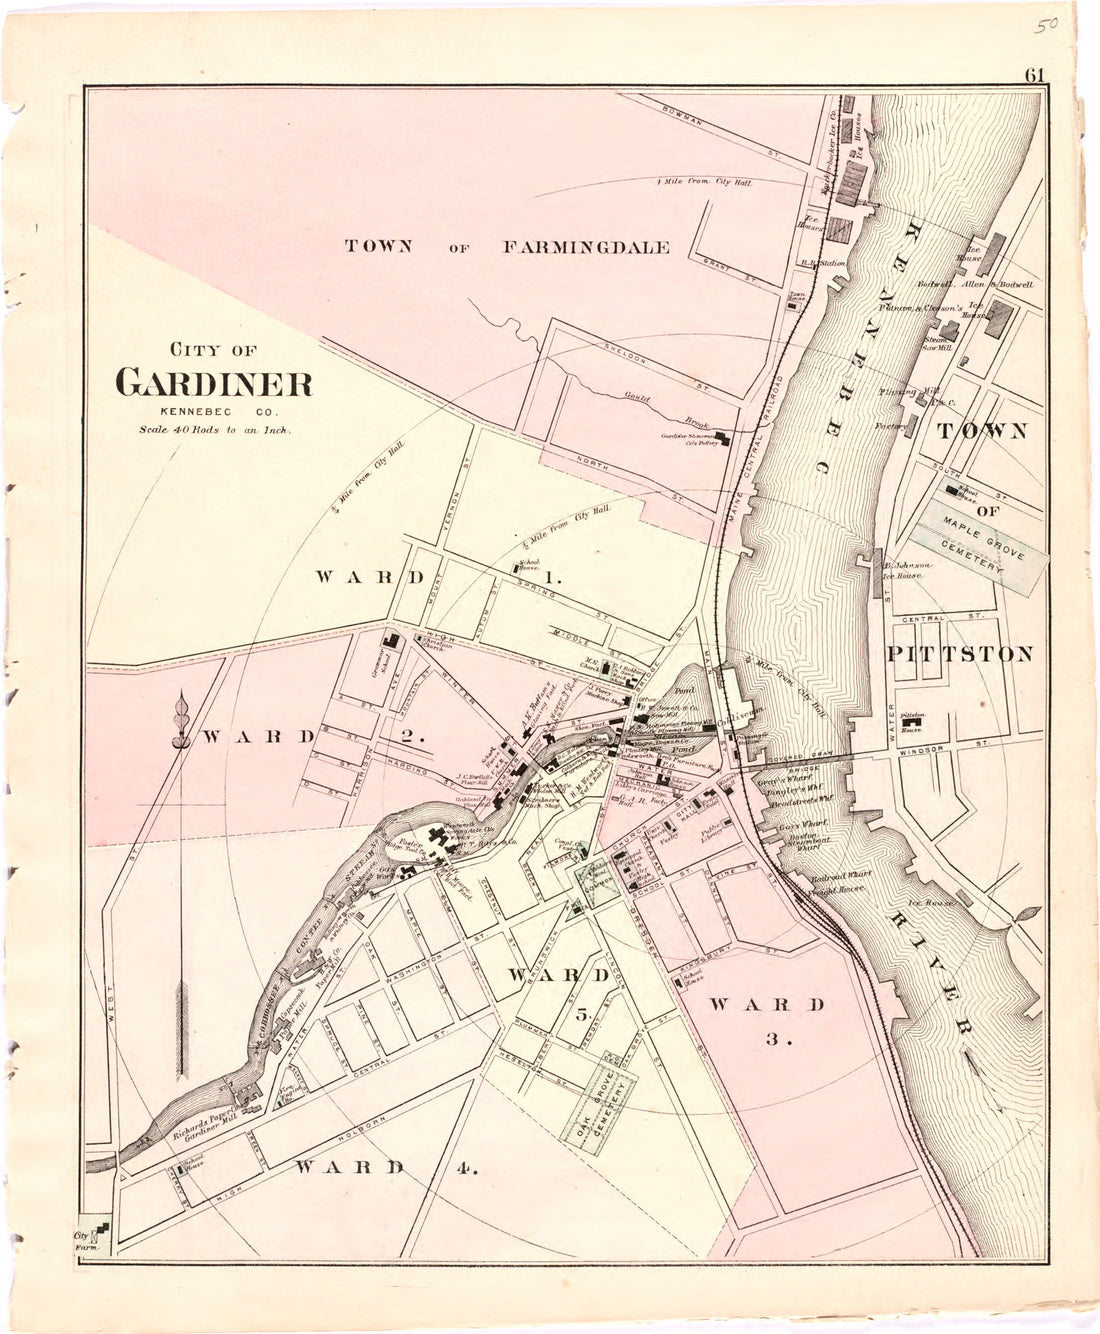 This hand drawn illustration (map) of City of Gardiner from Colby&